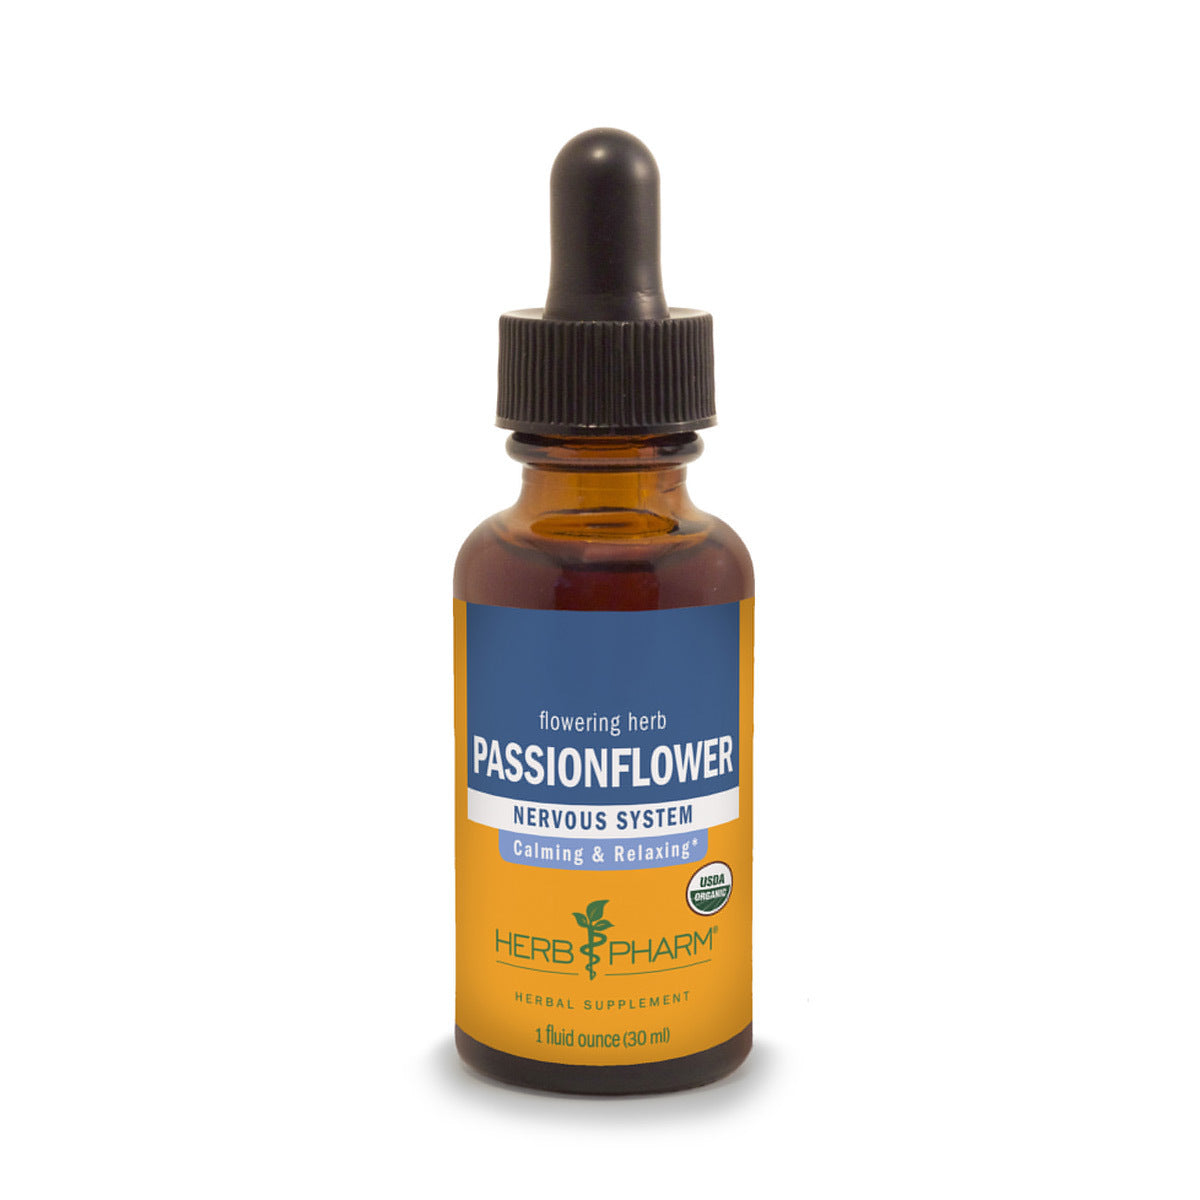 Primary image of Passionflower Extract